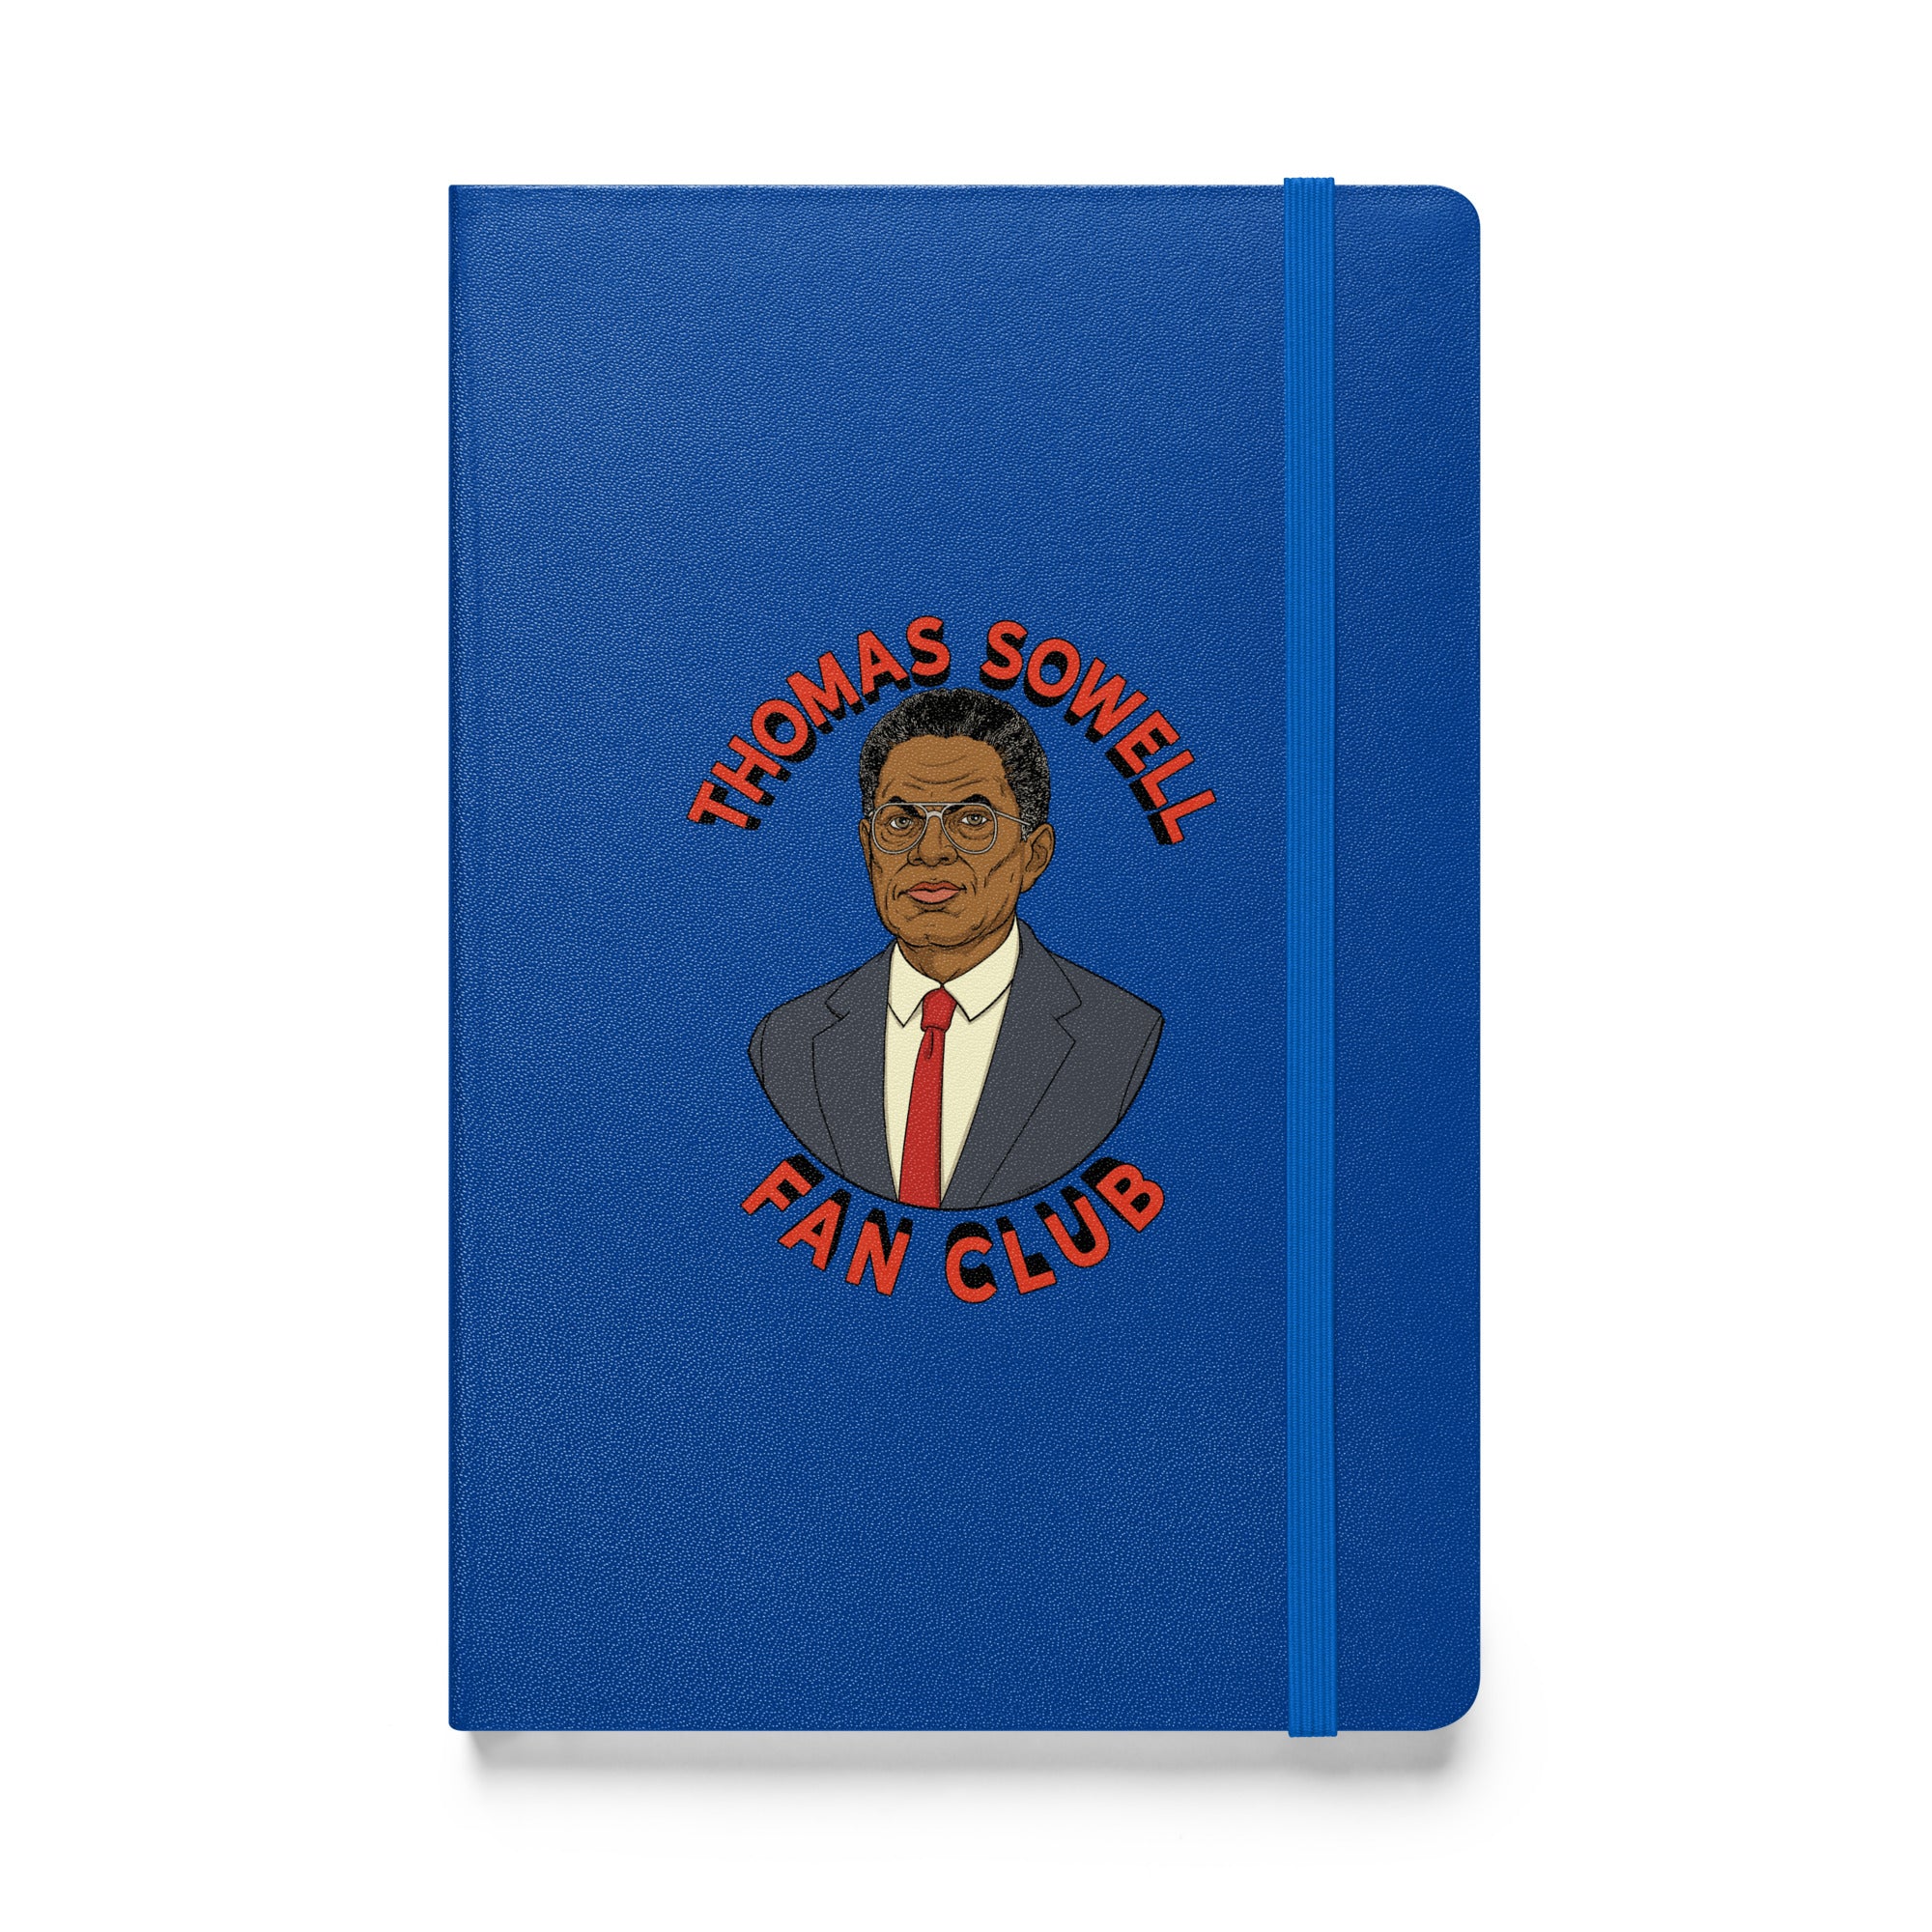 Thomas Sowell Fan Club Hardcover Bound Notebook